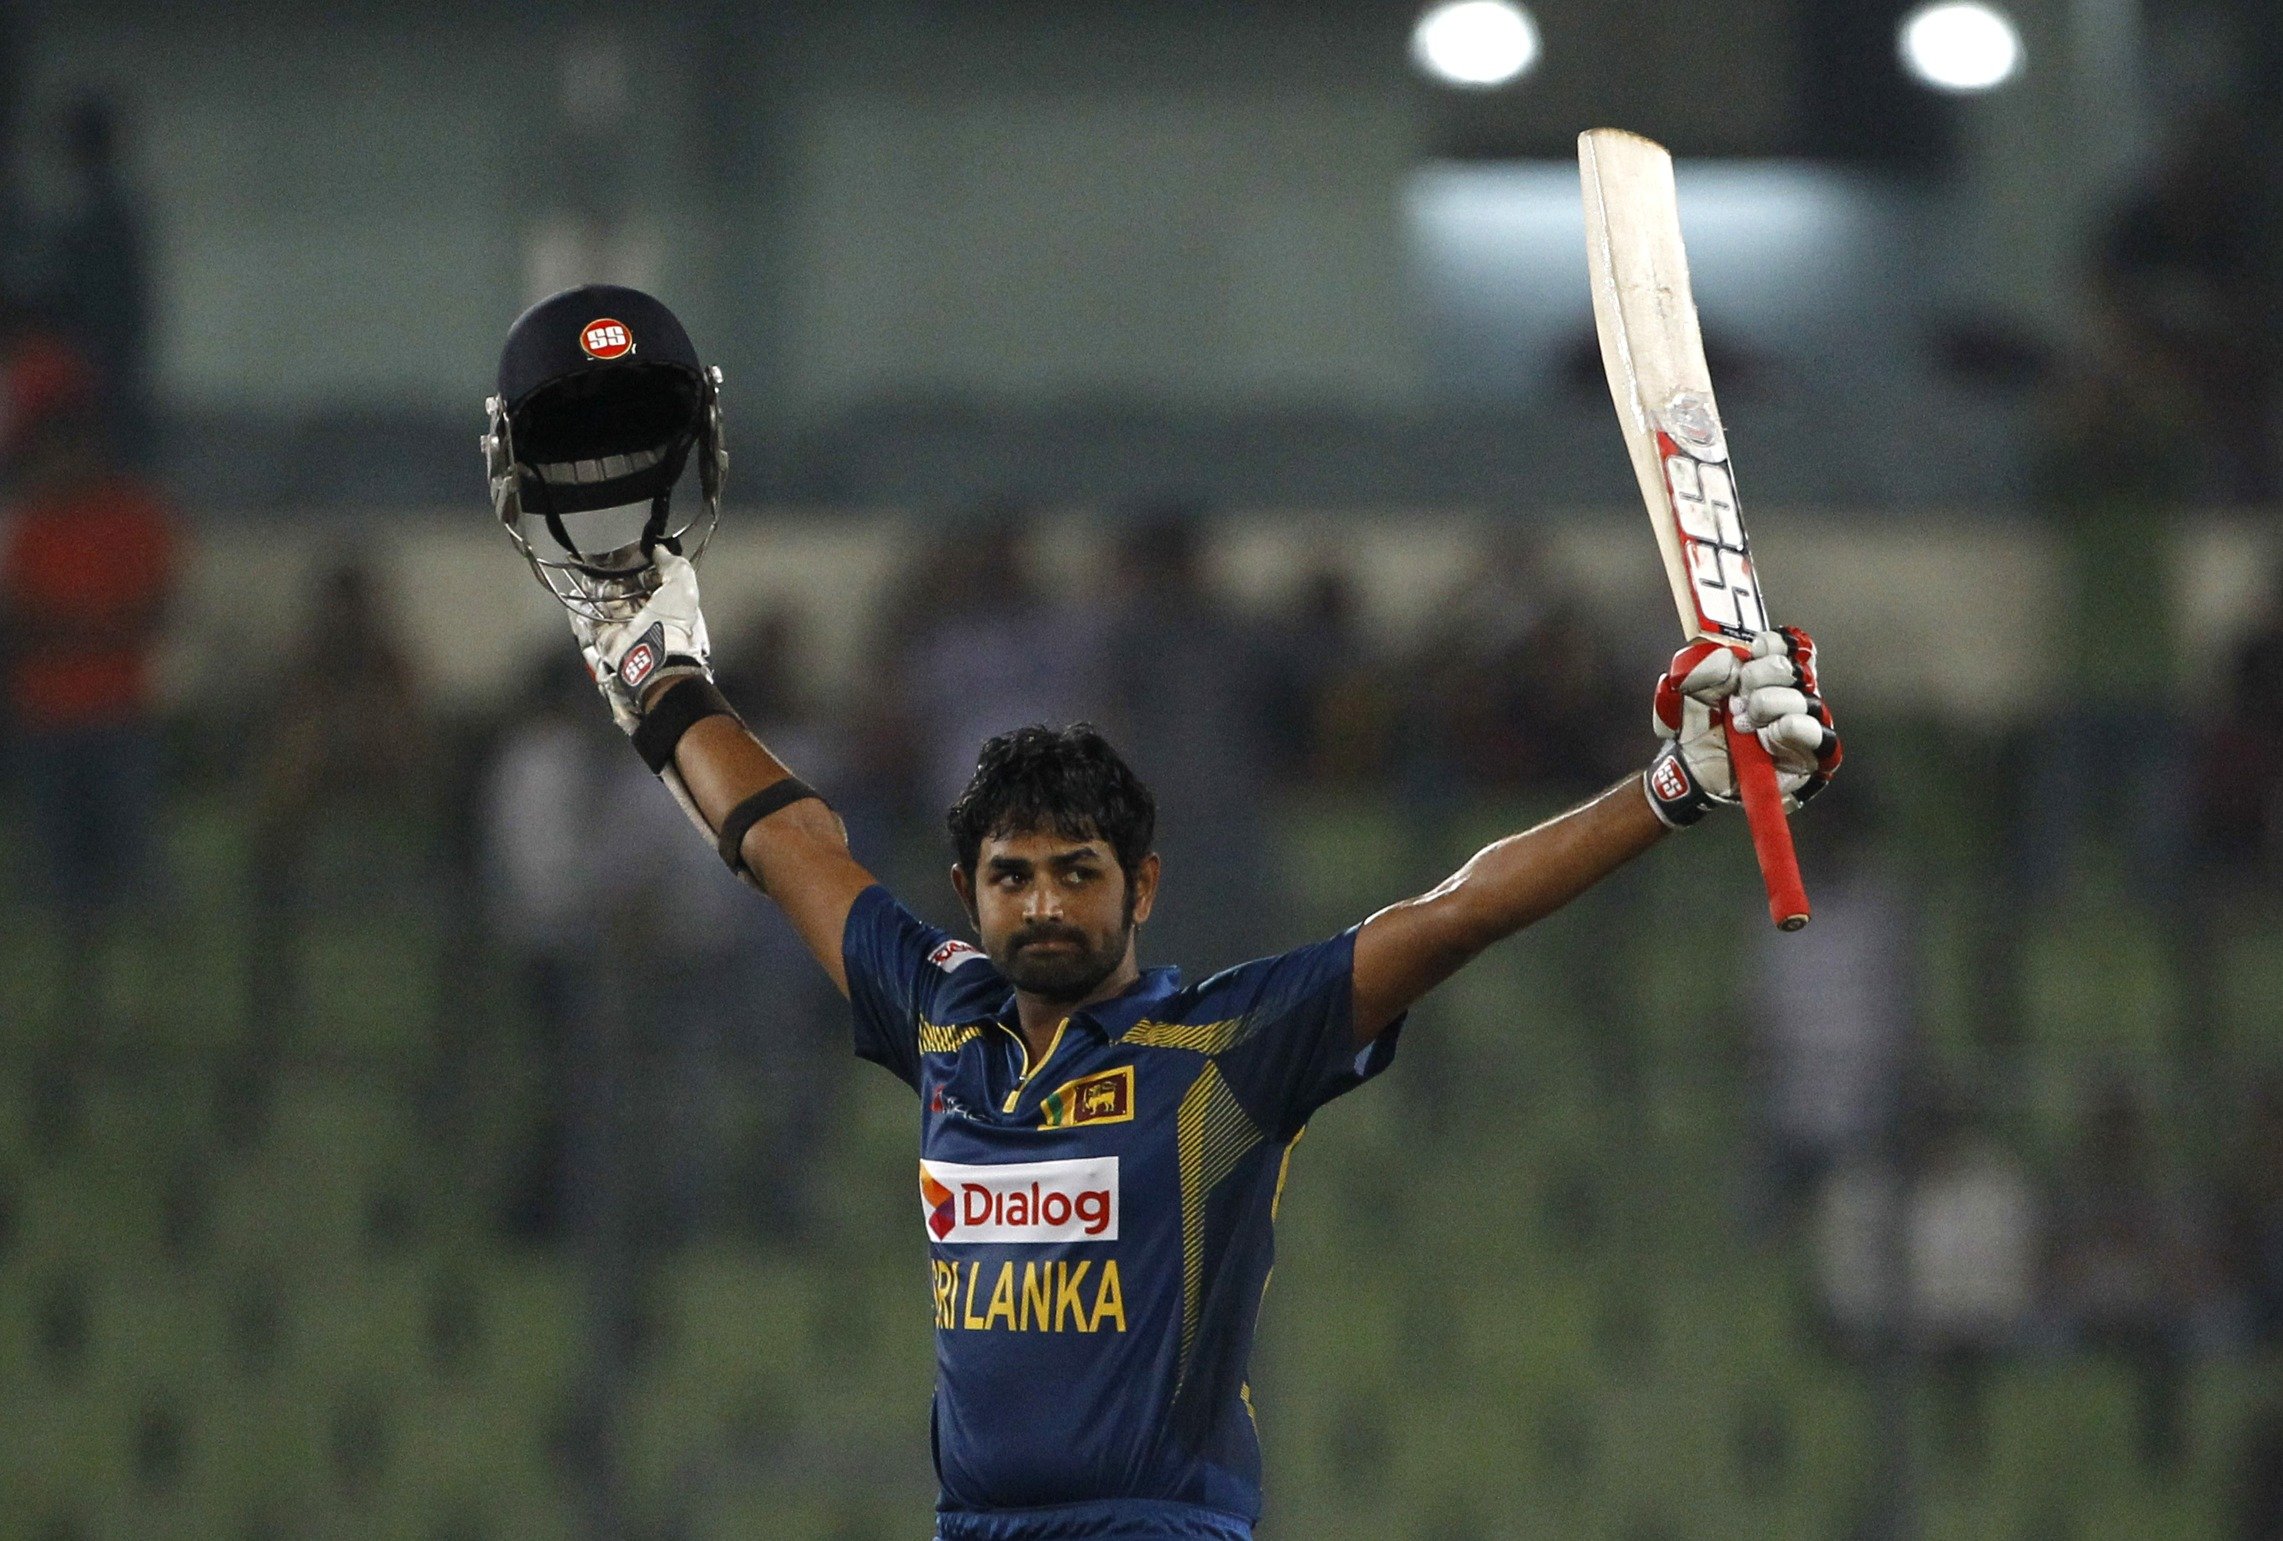 Sri Lanka's Lahiru Thirimanne celebrates after scoring a century during the Asia Cup final cricket match against Pakistan in Dhaka. Photo: AP 